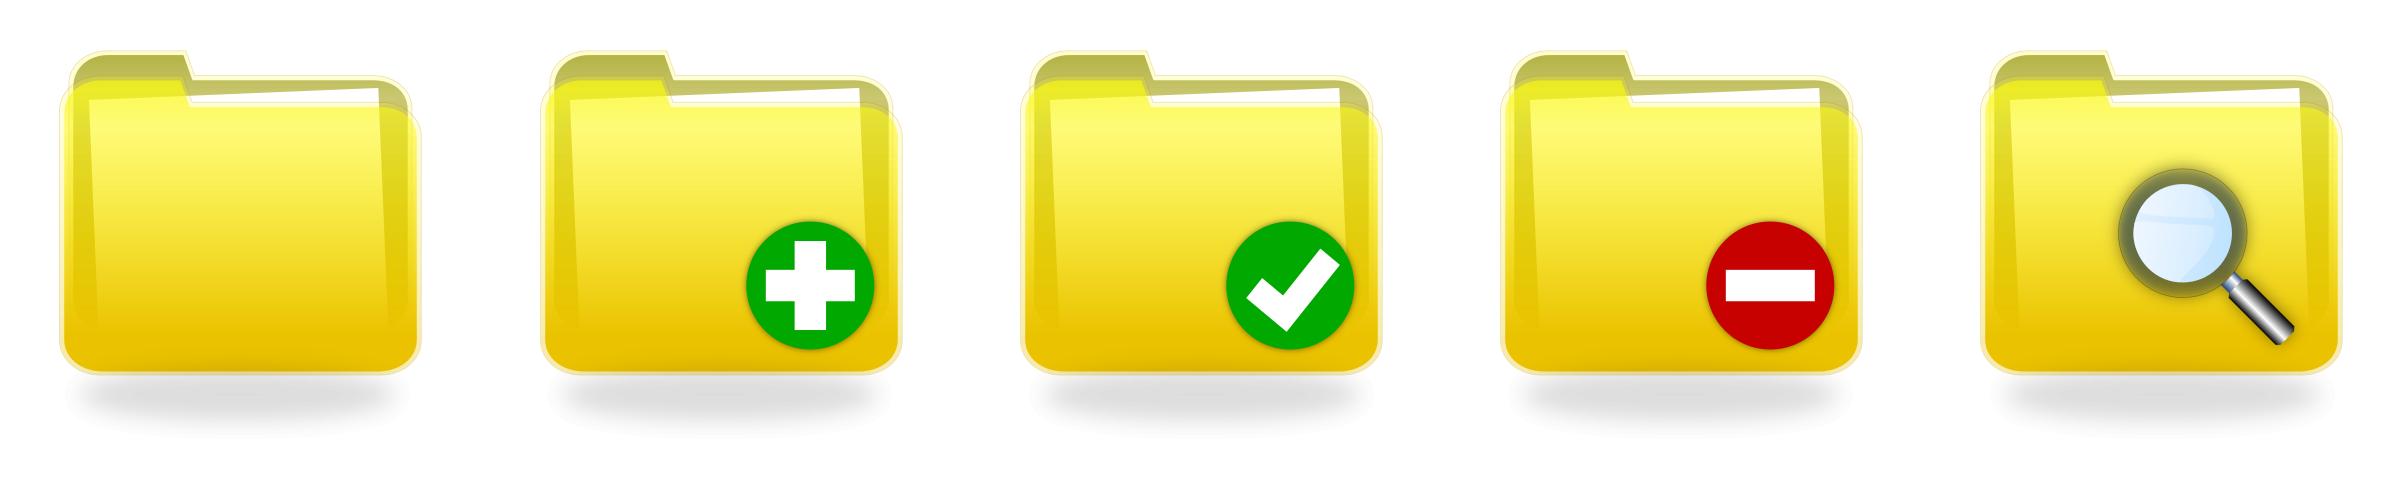 Yellow Folder Icons png